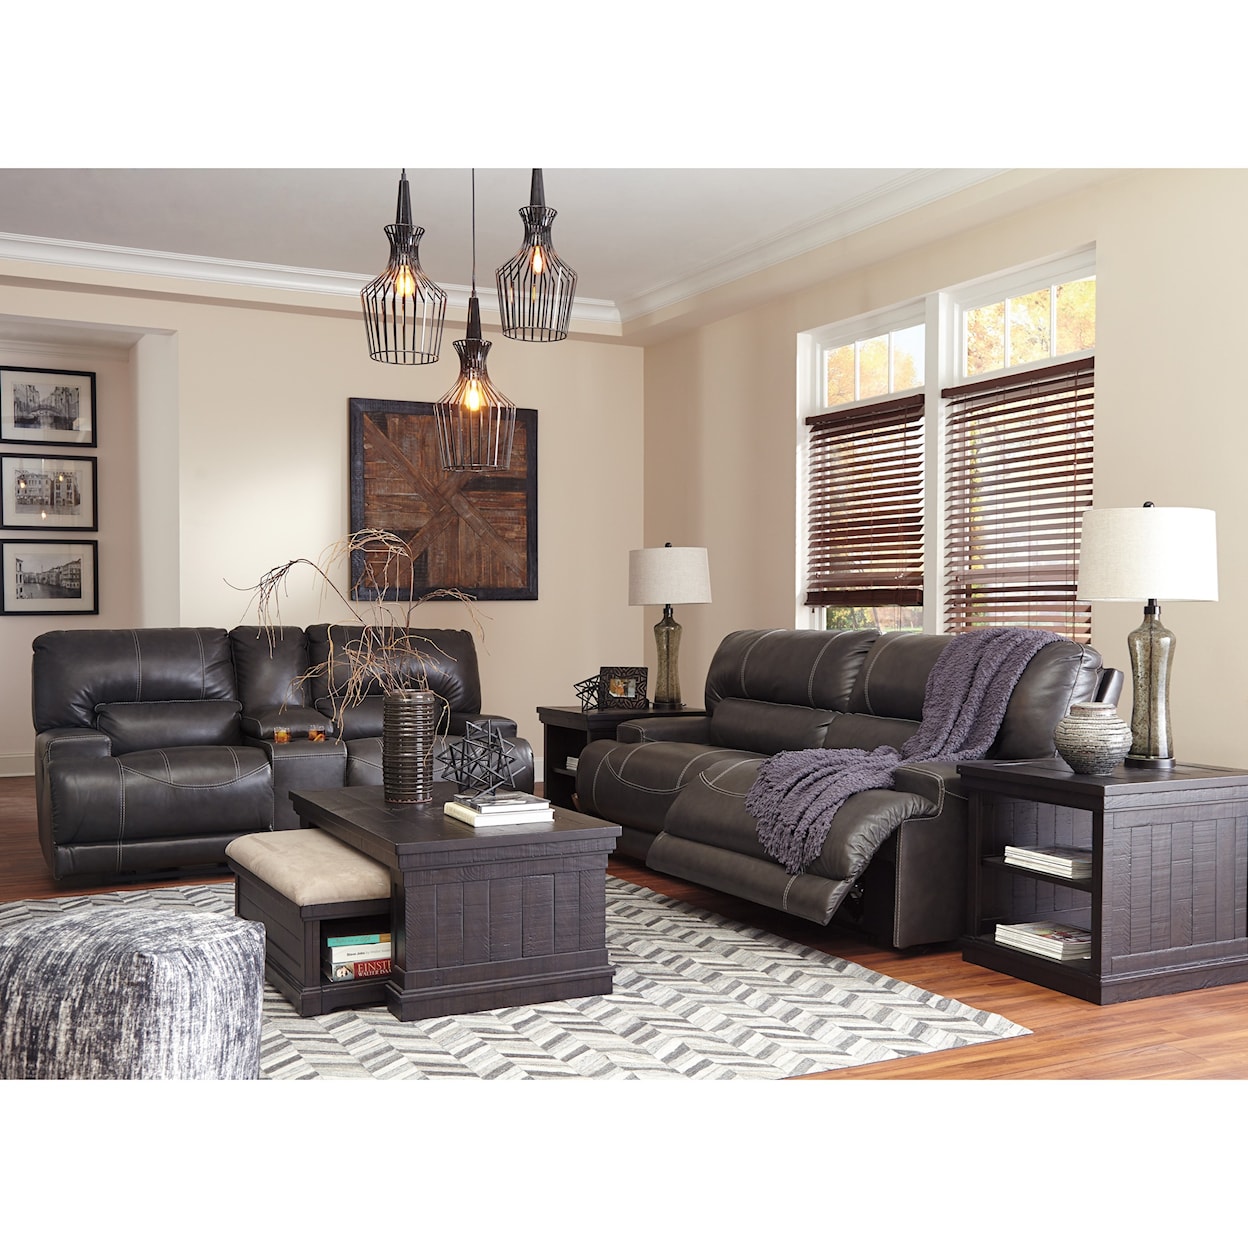 Signature Design by Ashley Furniture McCaskill Double Reclining Power Loveseat w/ Console